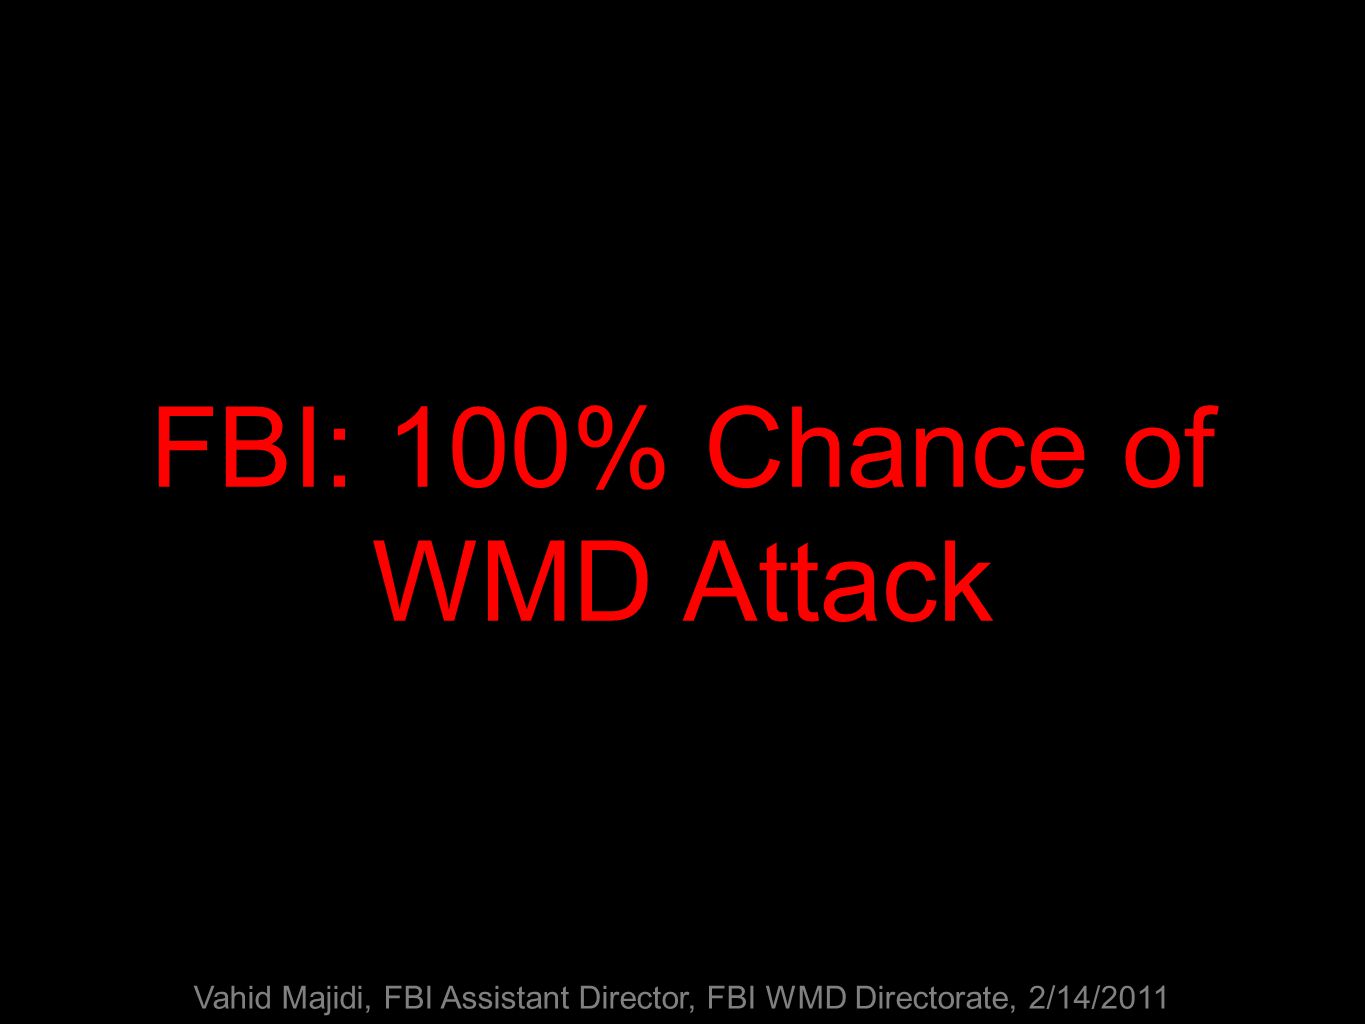 FBI: 100% Chance of WMD Attack